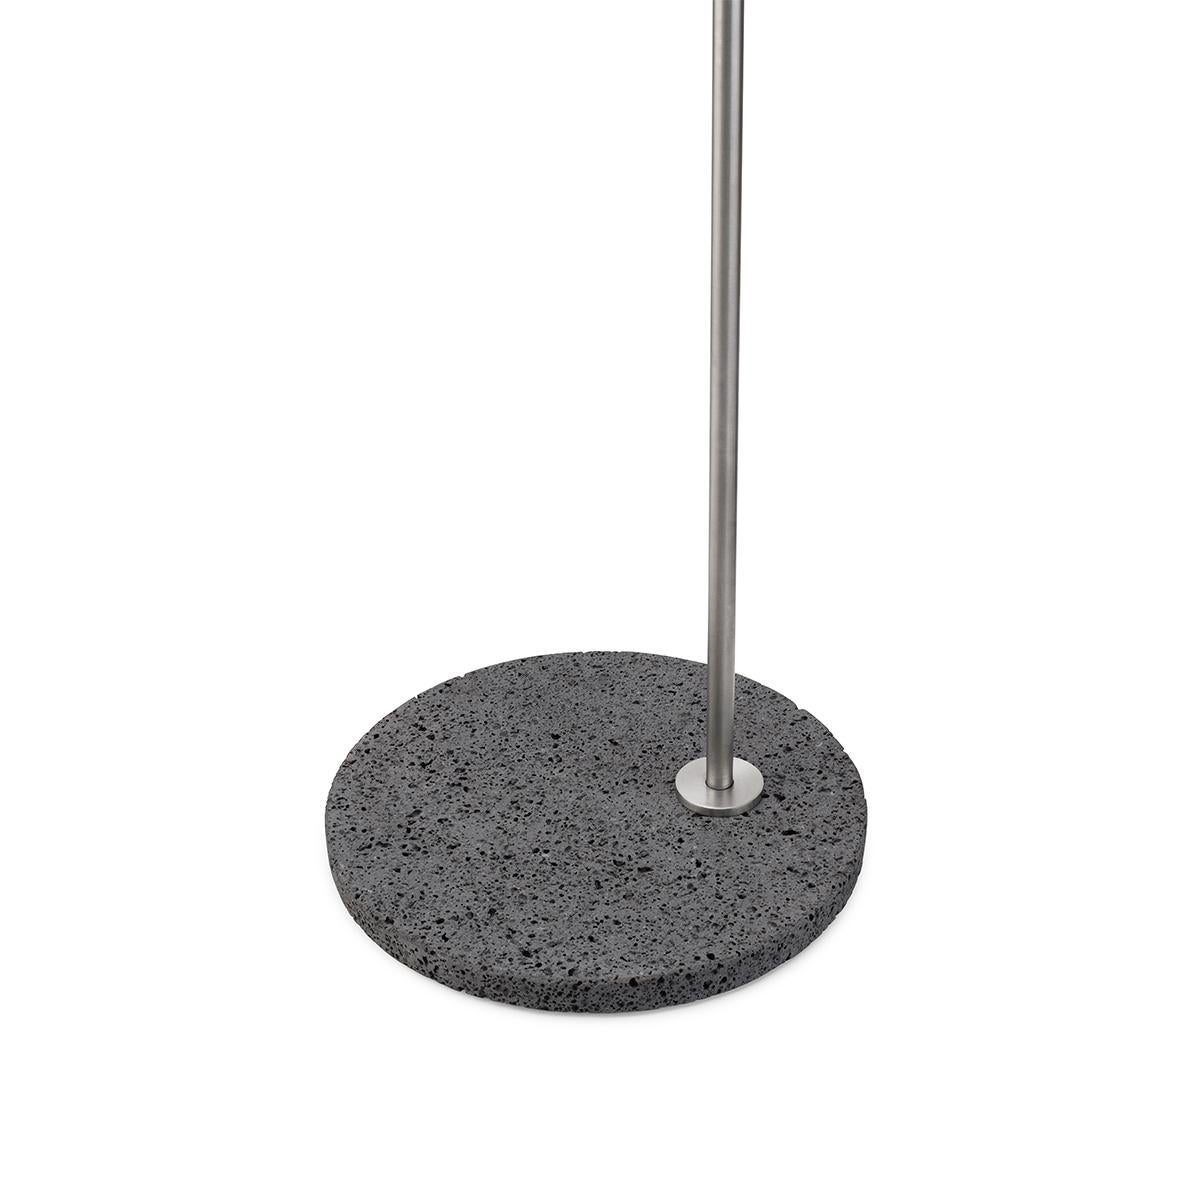 For Sale: Gray (Stainless Steel / Occhio di Pernice Base) Flos IC Lights F2 Outdoor Floor Lamp by Michael Anastassiades 2